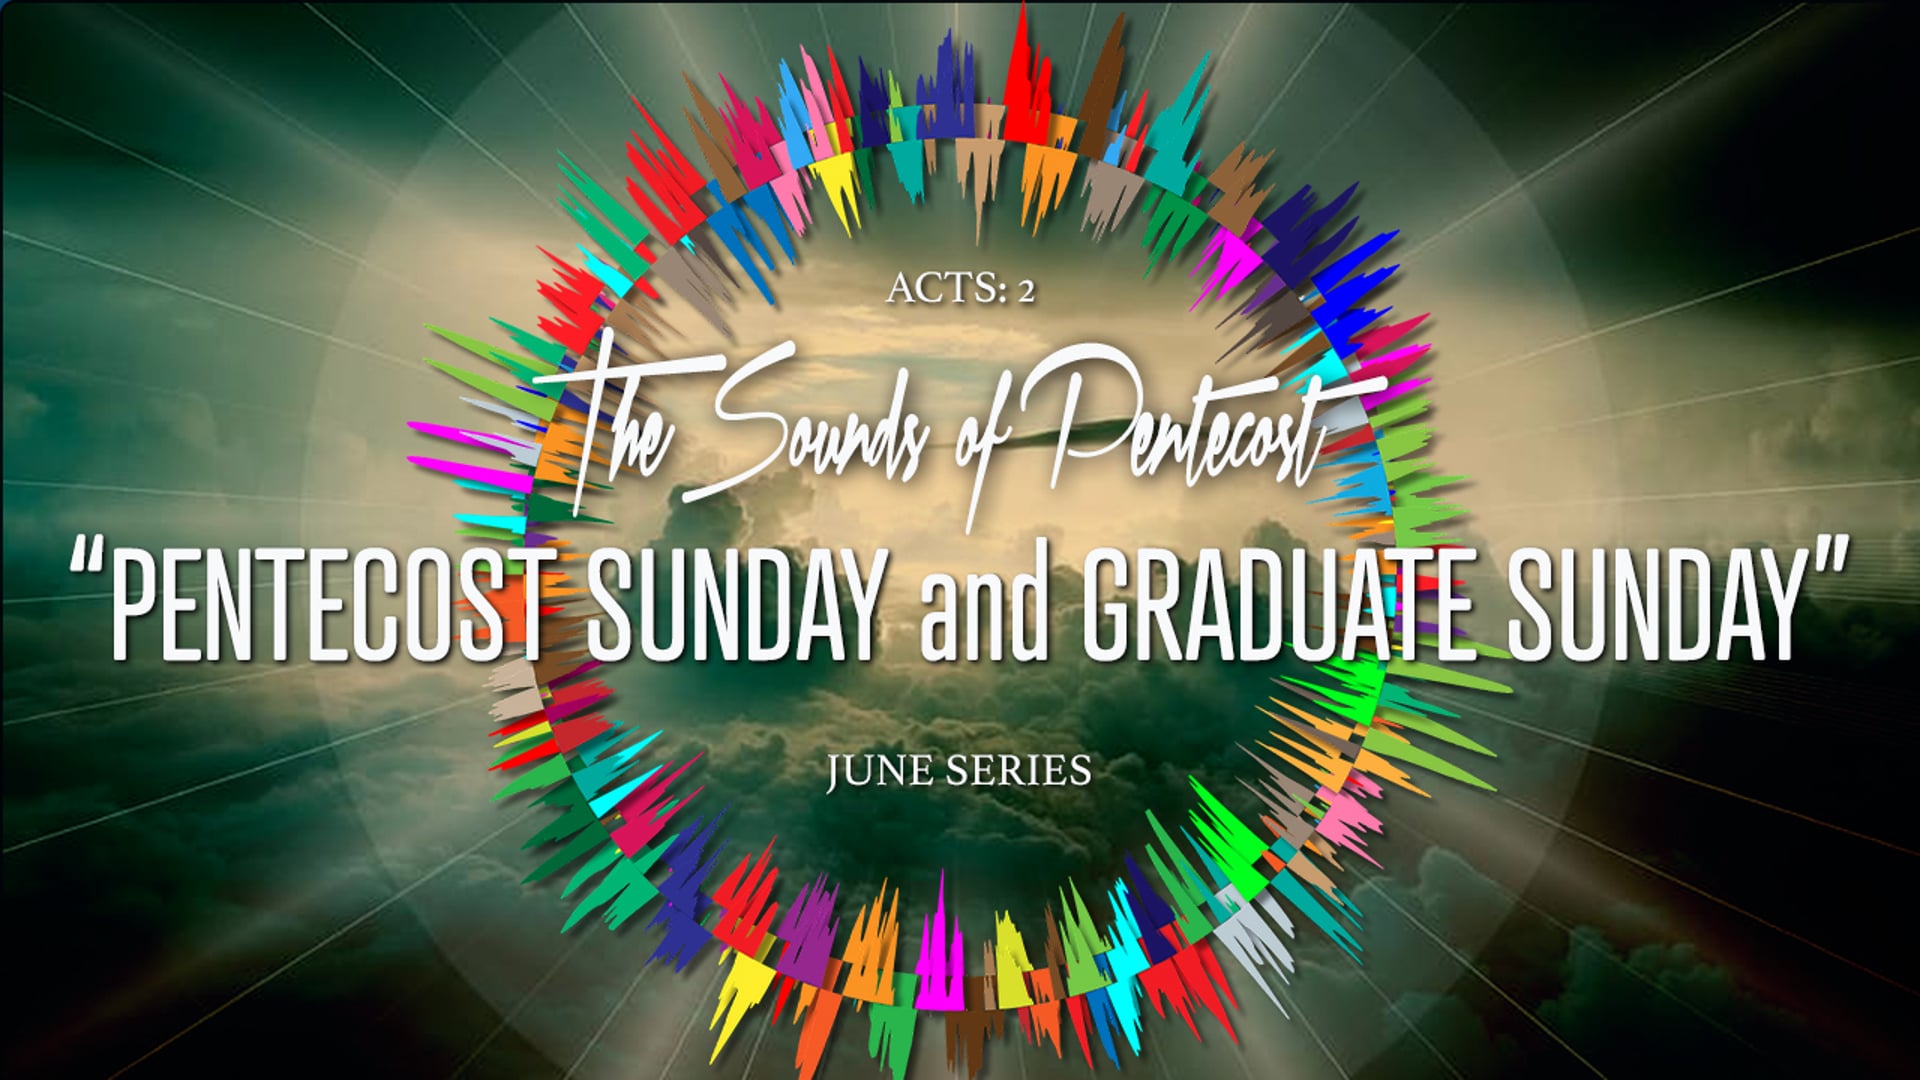 The Sounds of Pentecost - PENTECOST SUNDAY and GRADUATE SUNDAY - Text to Give - 910-460-3377 - Give Online @ www.destinynow.org